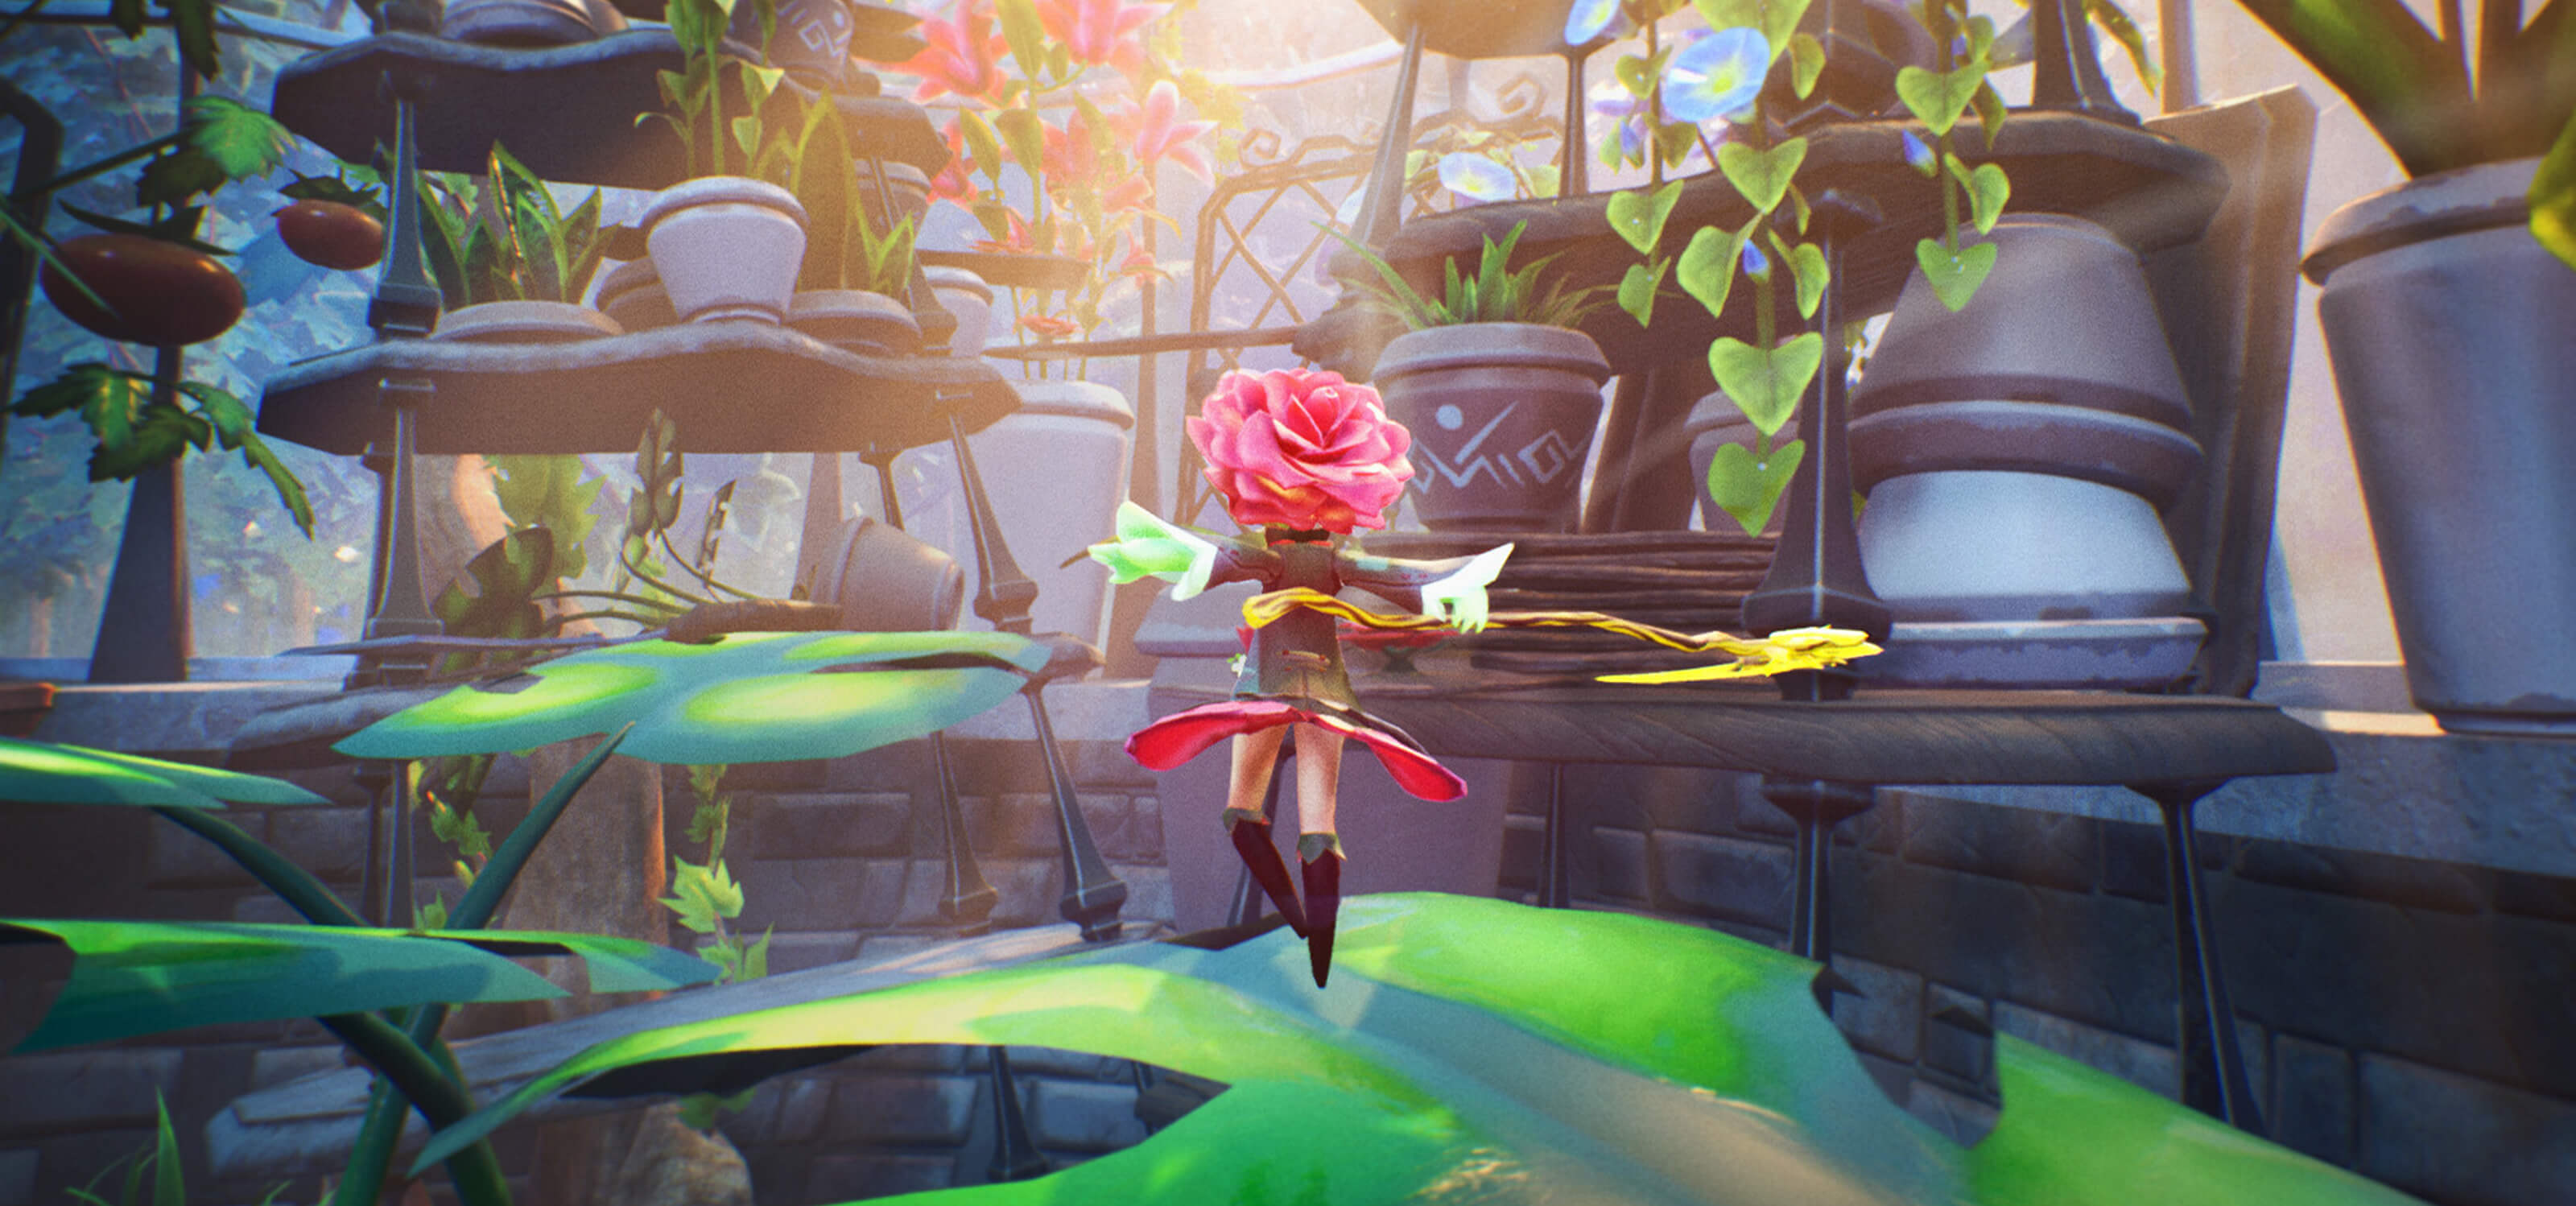 The lush adventure starring a scythe-wielding rose was inspired by a shared love of plants.